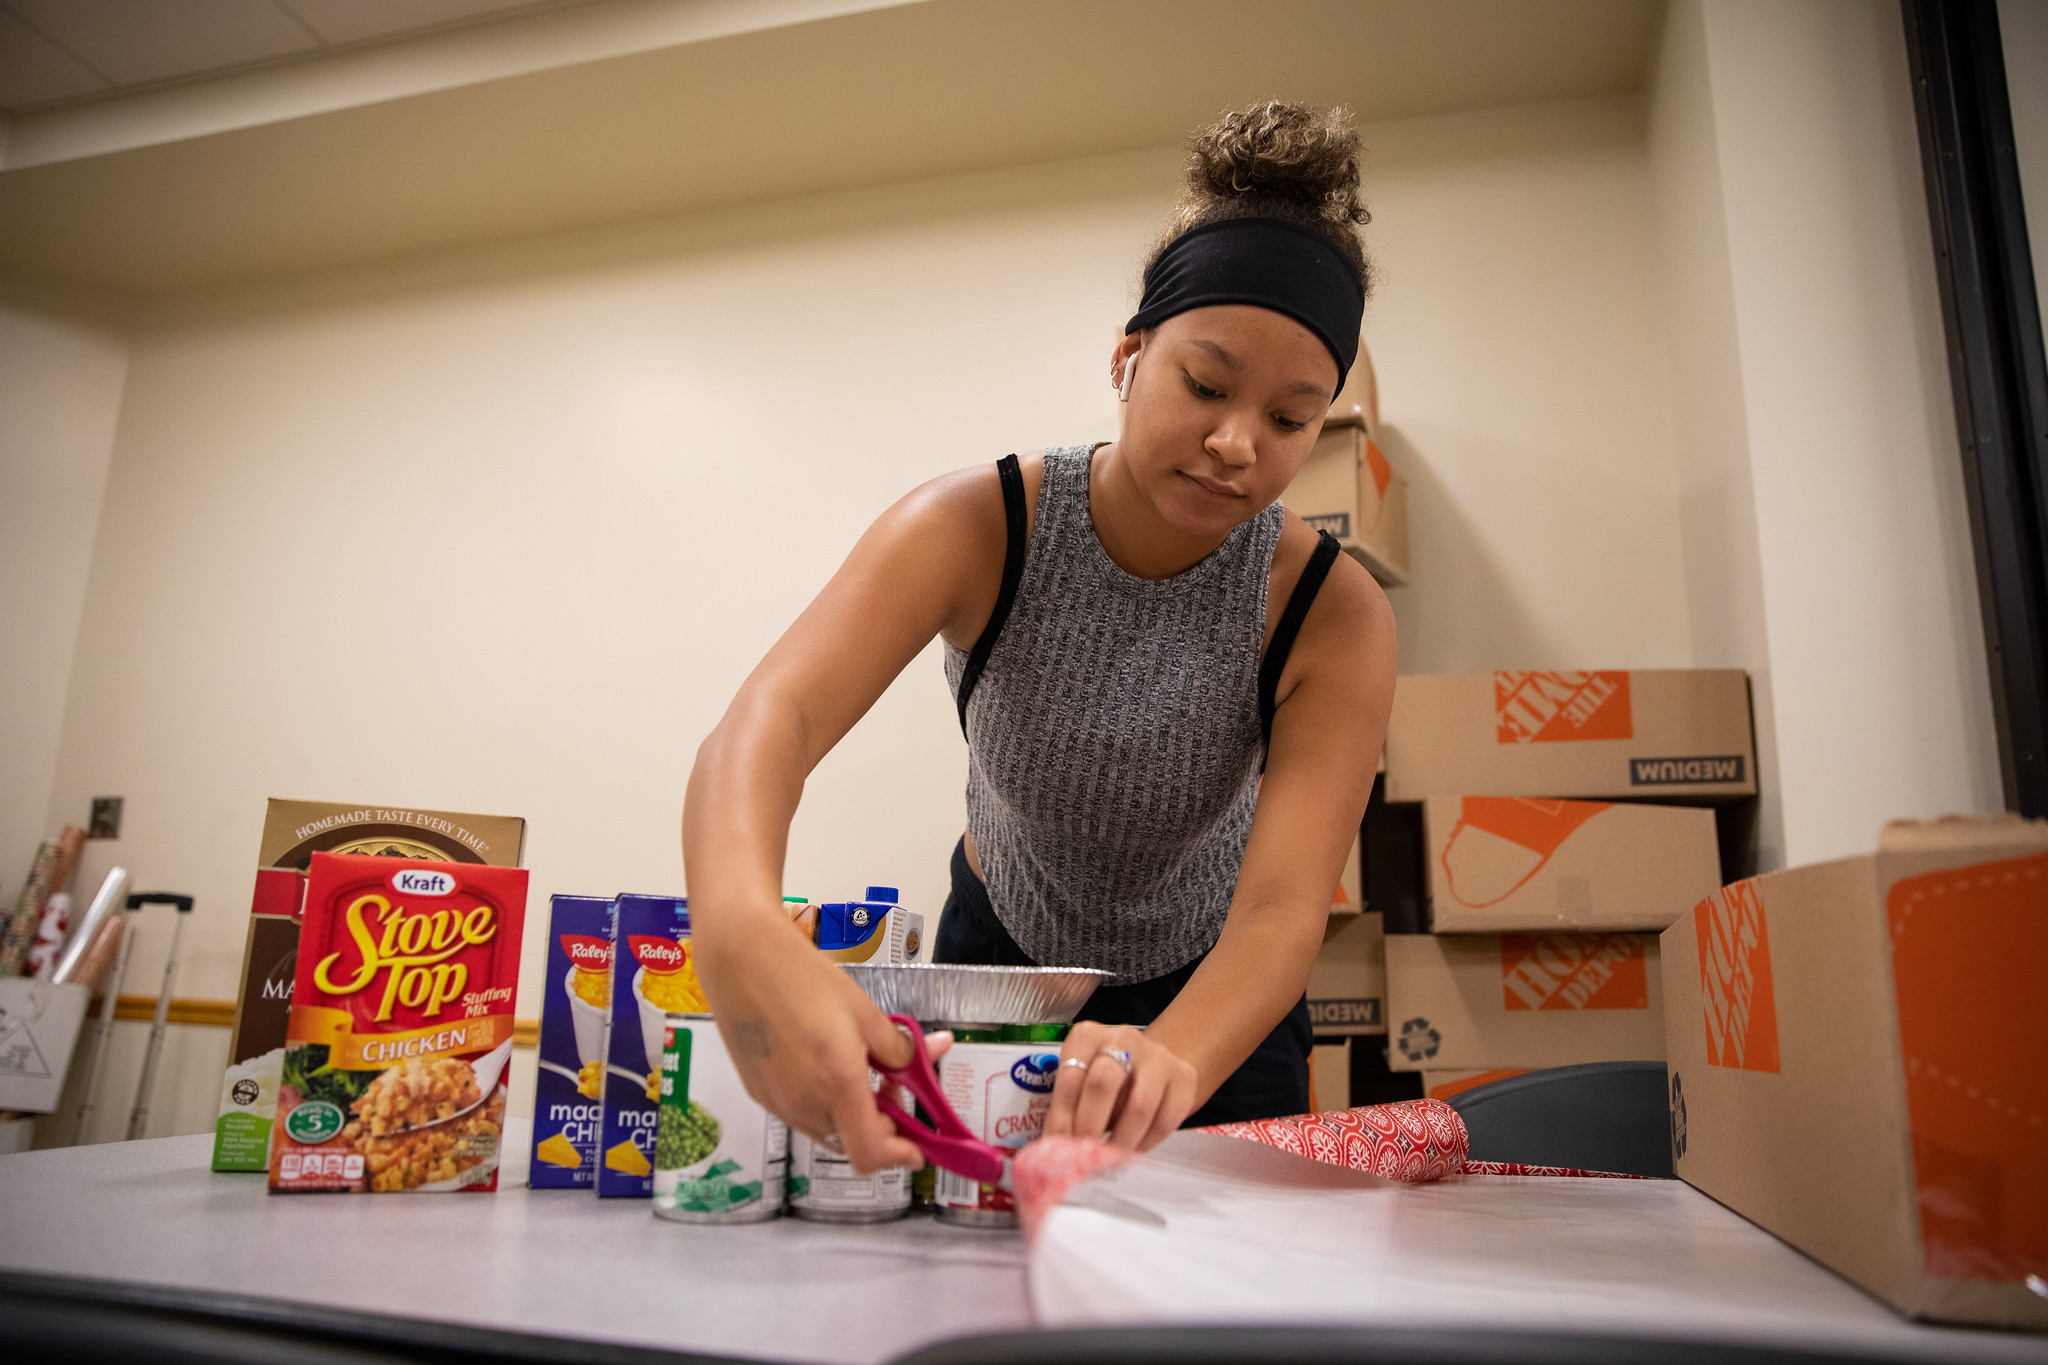 An ASI volunteer prepares a box that will be used as a Thanksgiving food basket.